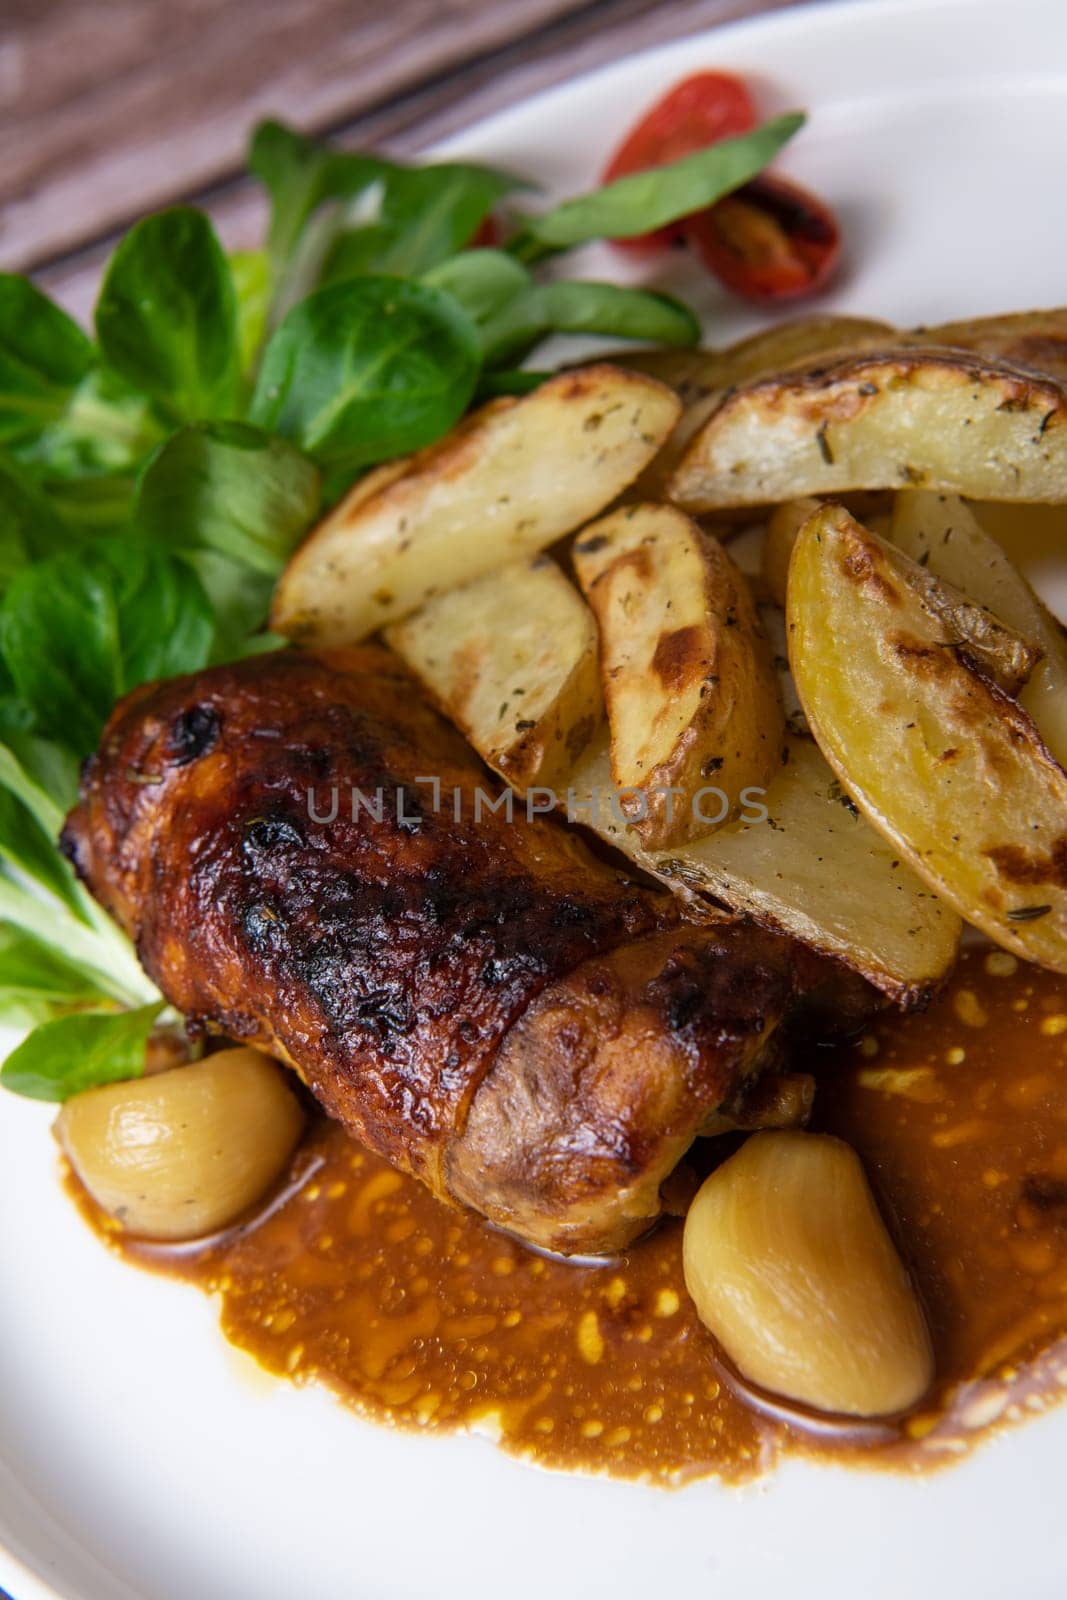 Recipe for boneless rolled chicken leg with potatoes and molasses-flavoured mache salad, High quality photo